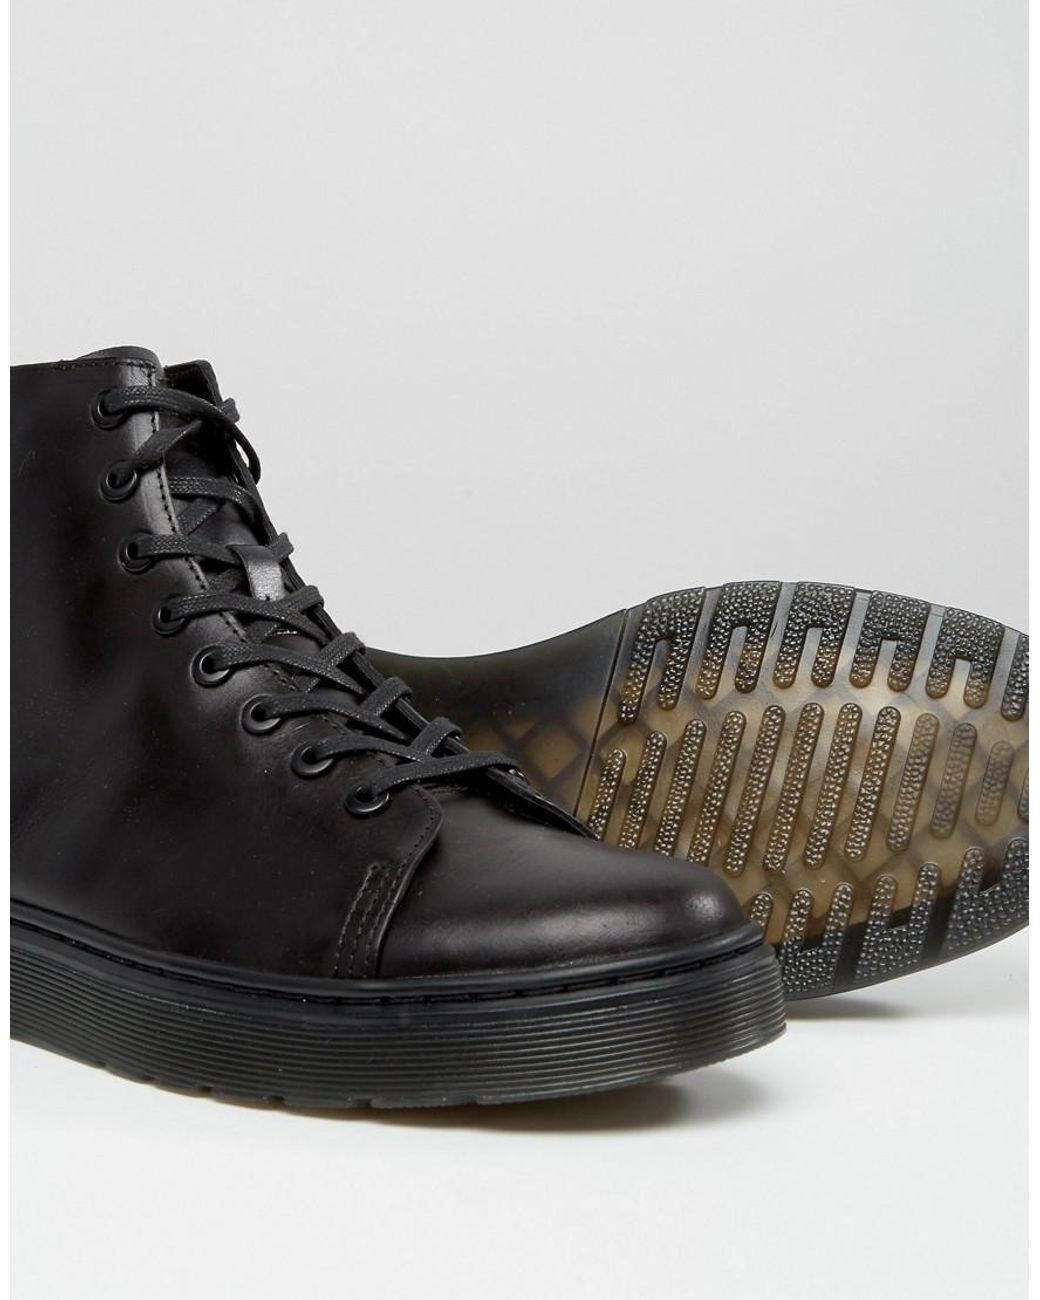 DR MARTENS TALIB LEATHER LACE UP BOOTS | islamiyyat.com